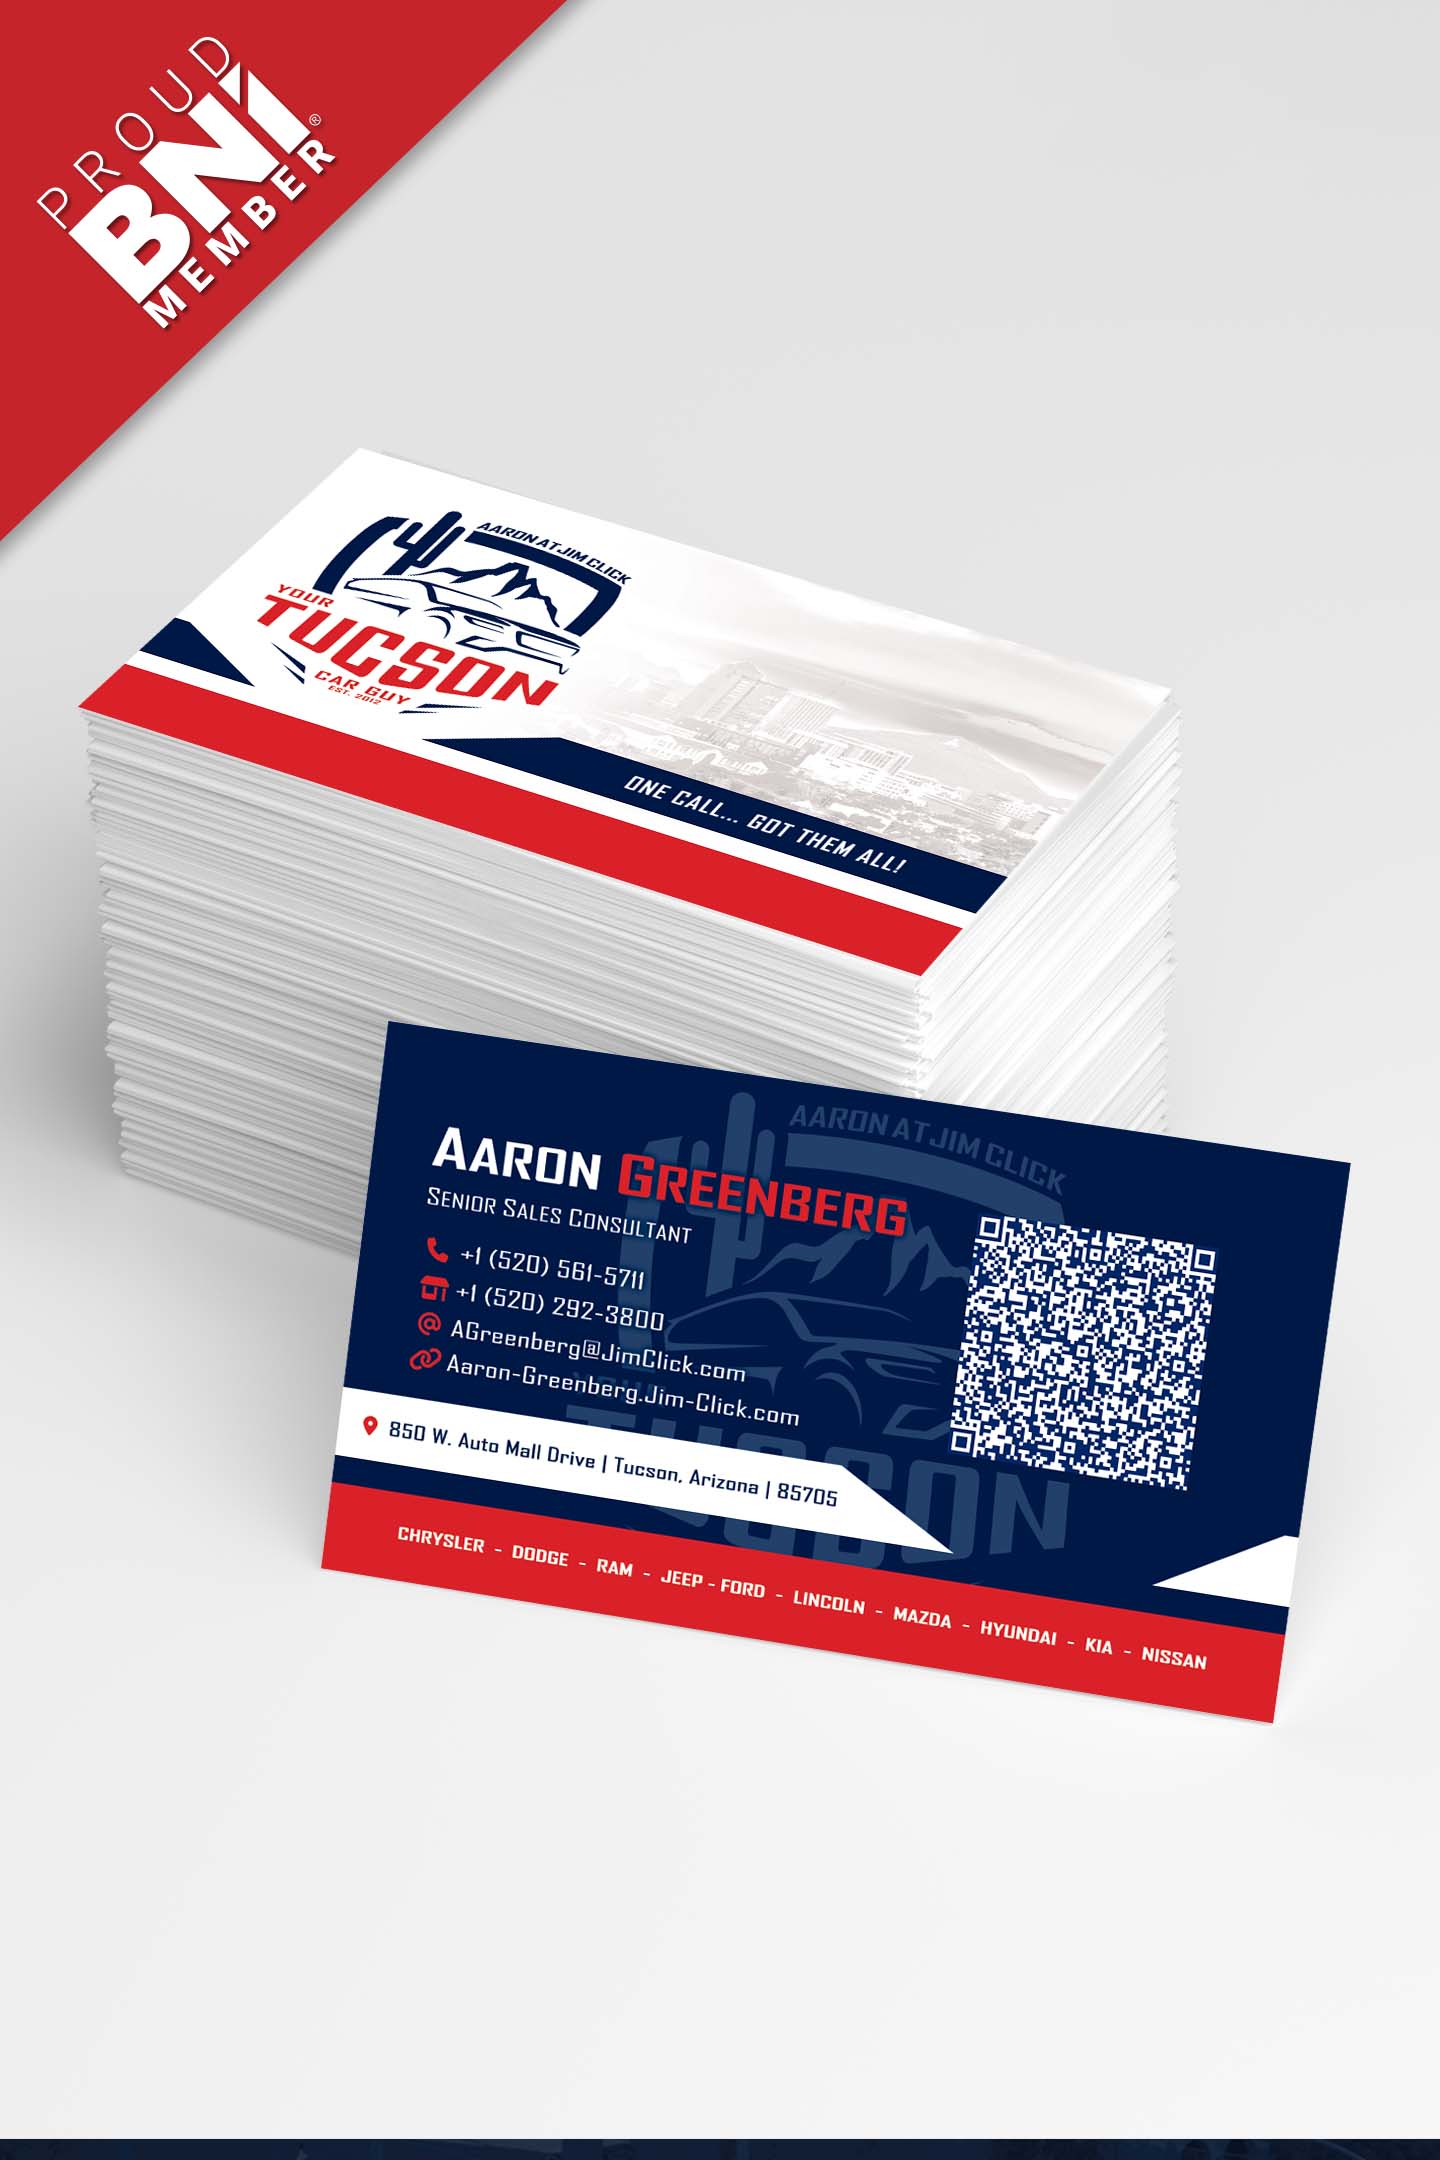 Your Tucson Car Guy - Business Cards